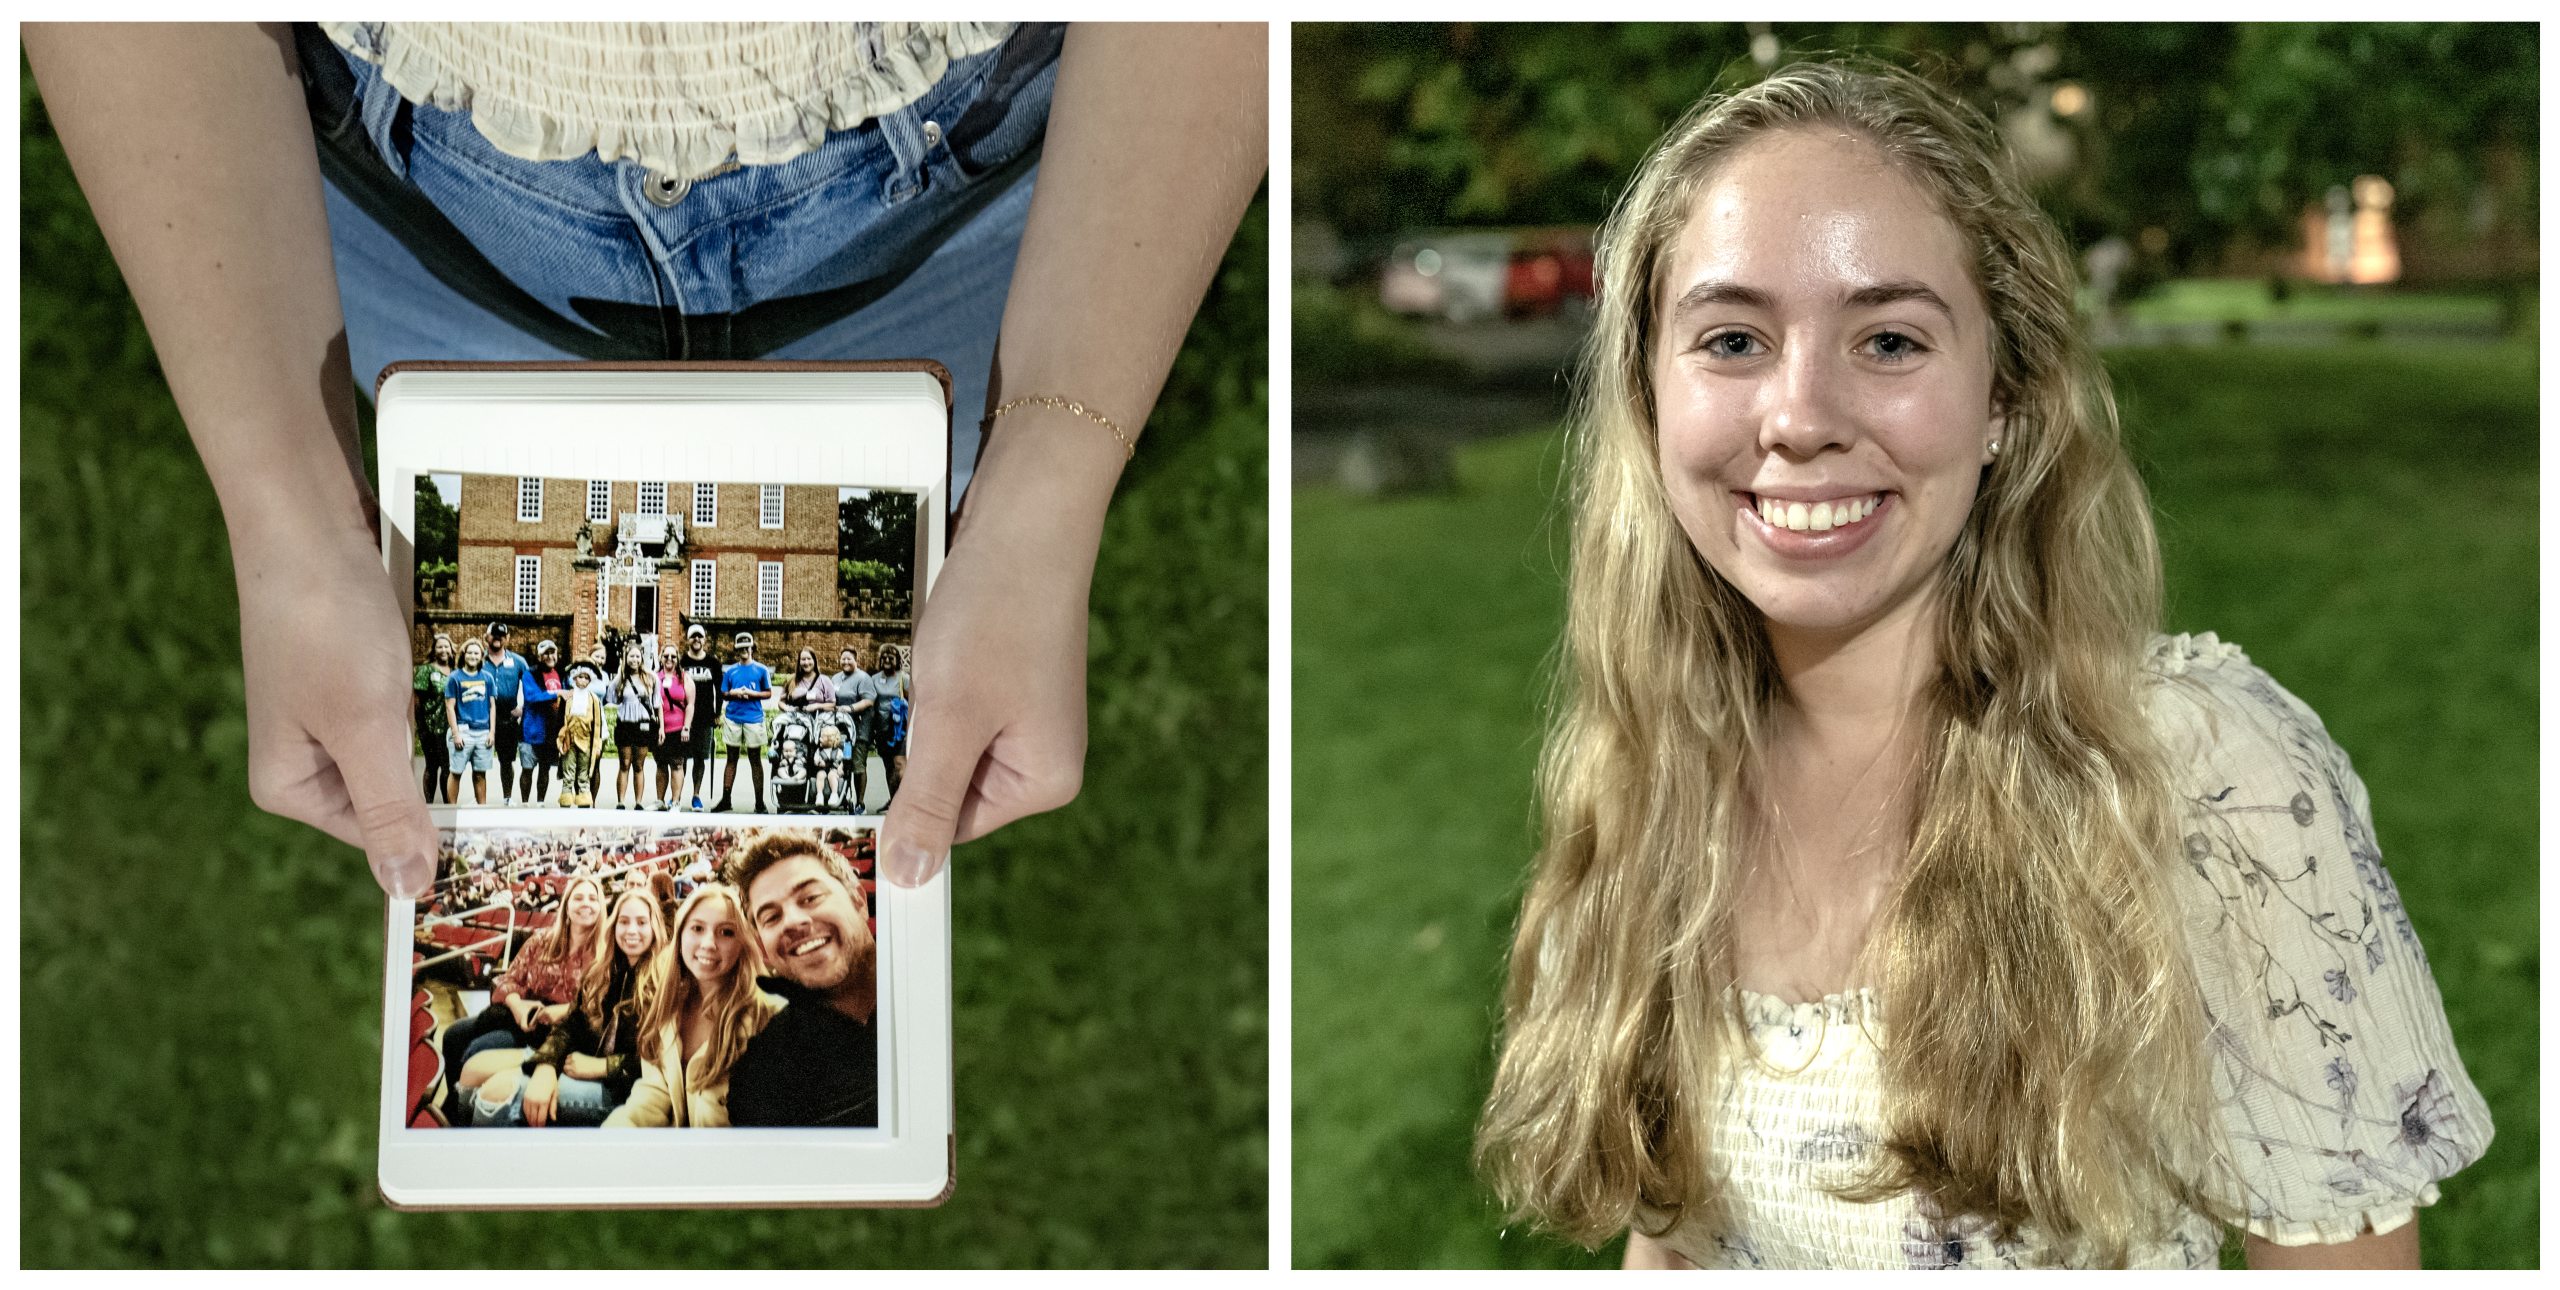 A two-photo collage: on the left shows the hands of a student named Haedyn Millers holding a journal that contains family photos, and on the right is a portrait of Haedyn.